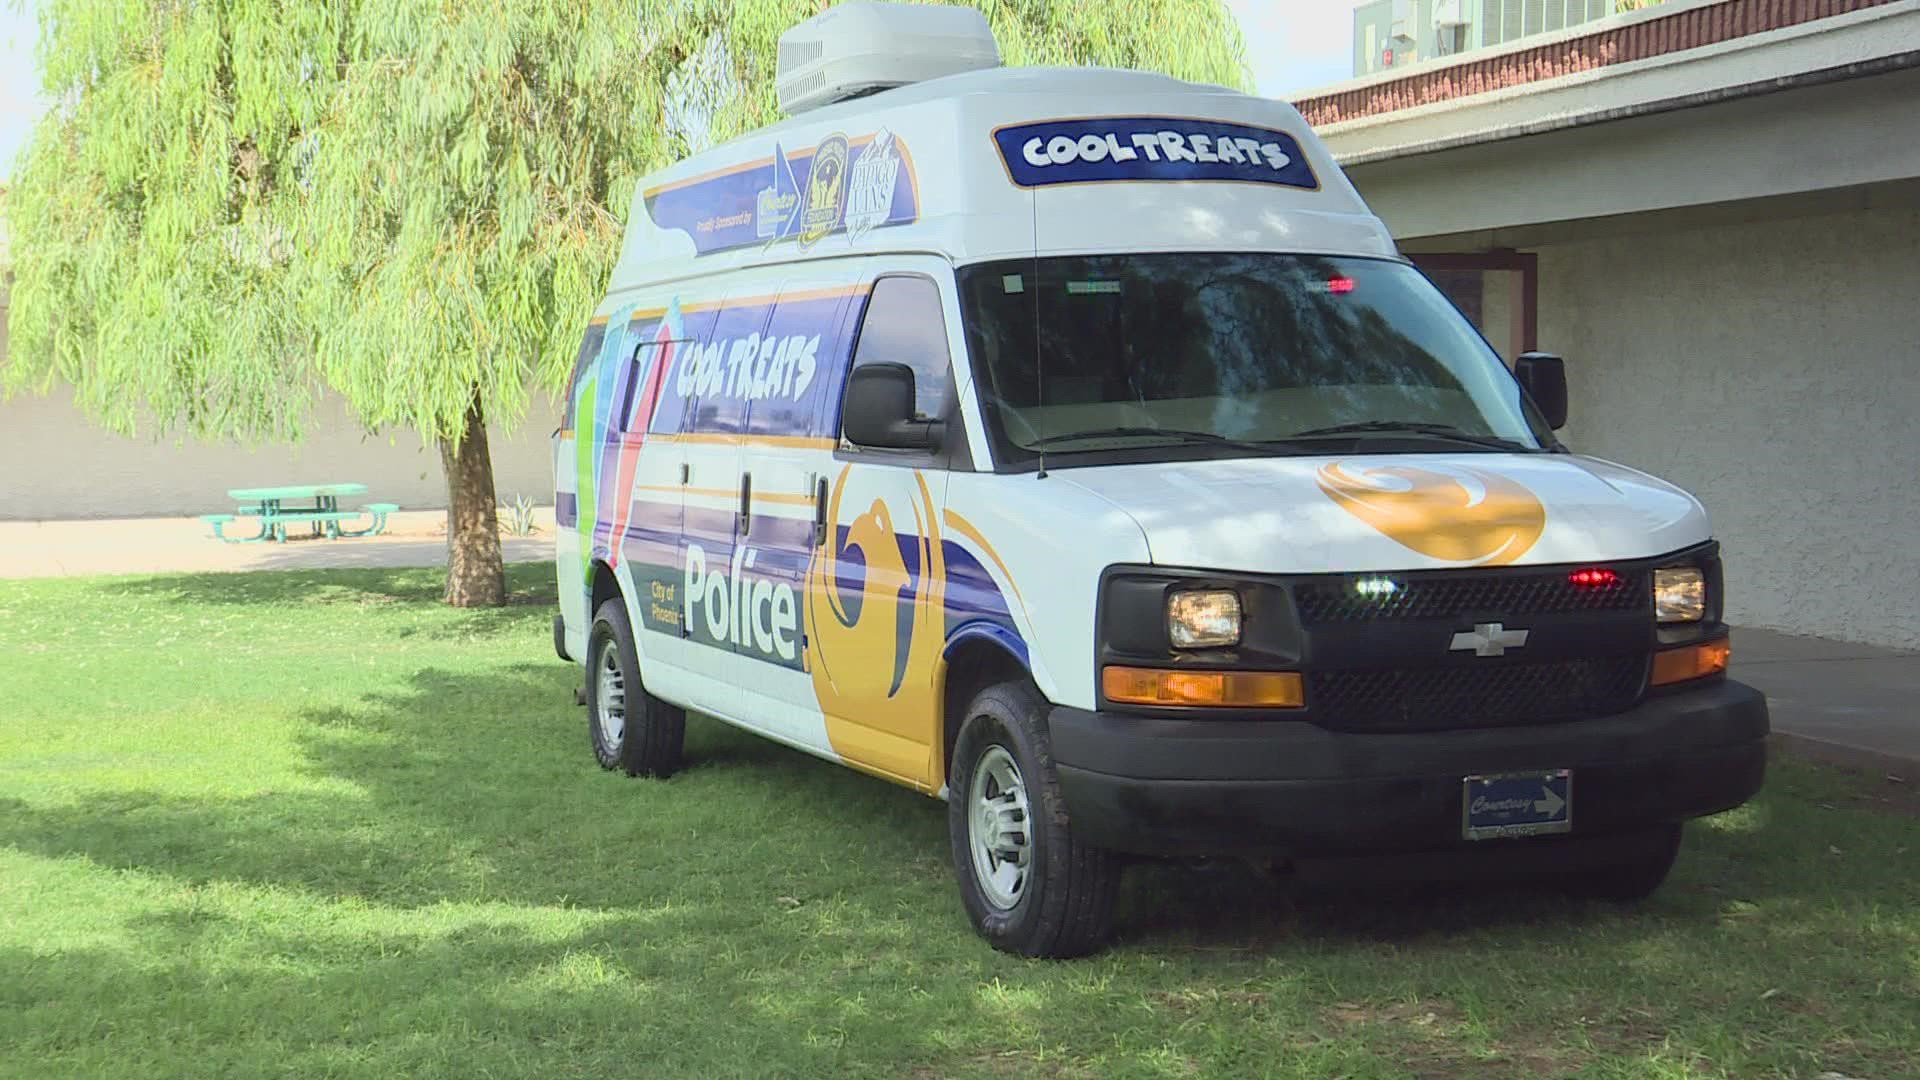 The Phoenix Police Department's ice cream van showed up at a local school Wednesday to hand out treats to students.